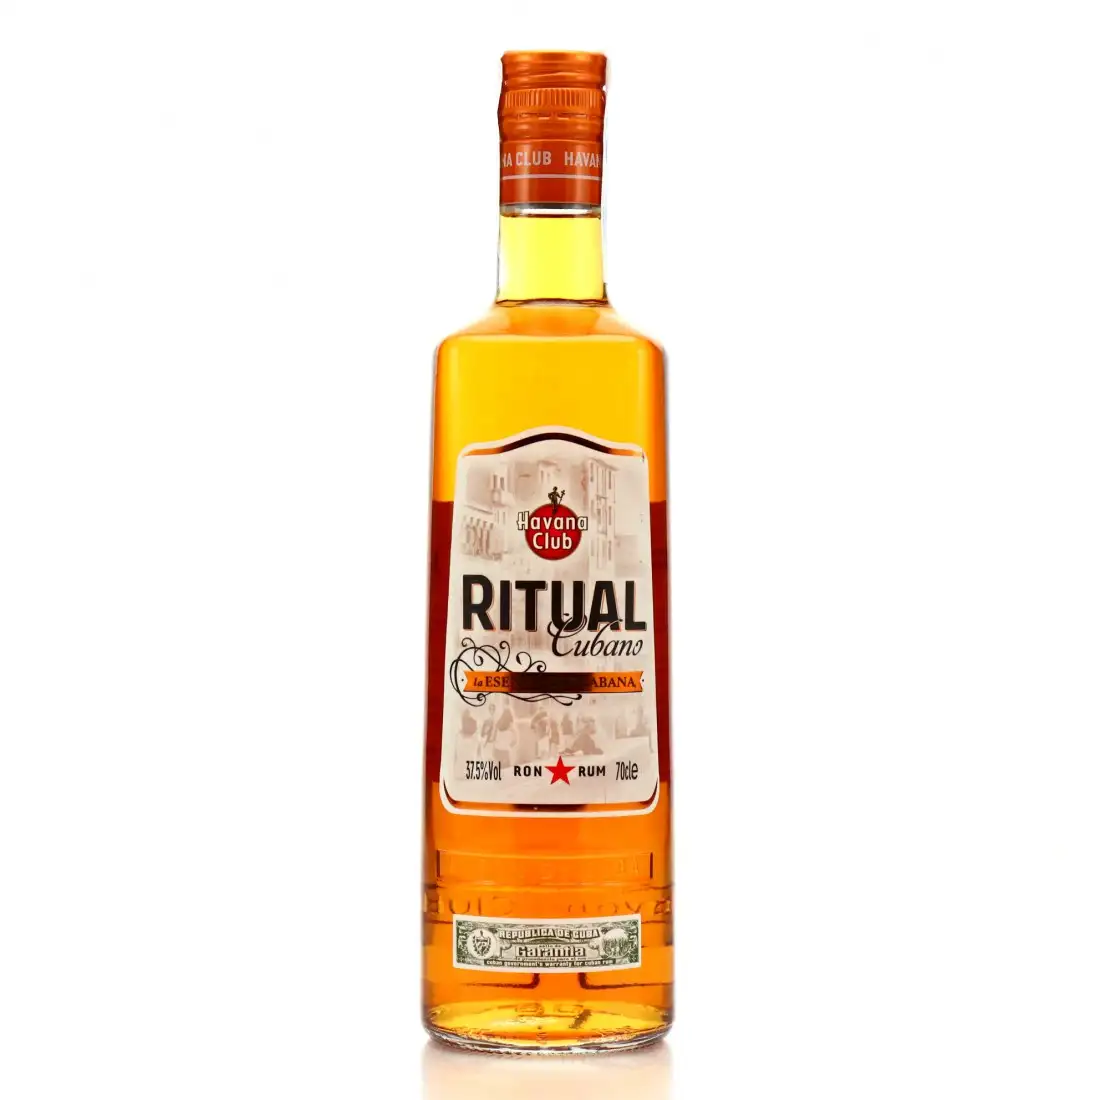 Image of the front of the bottle of the rum Ritual Cubano